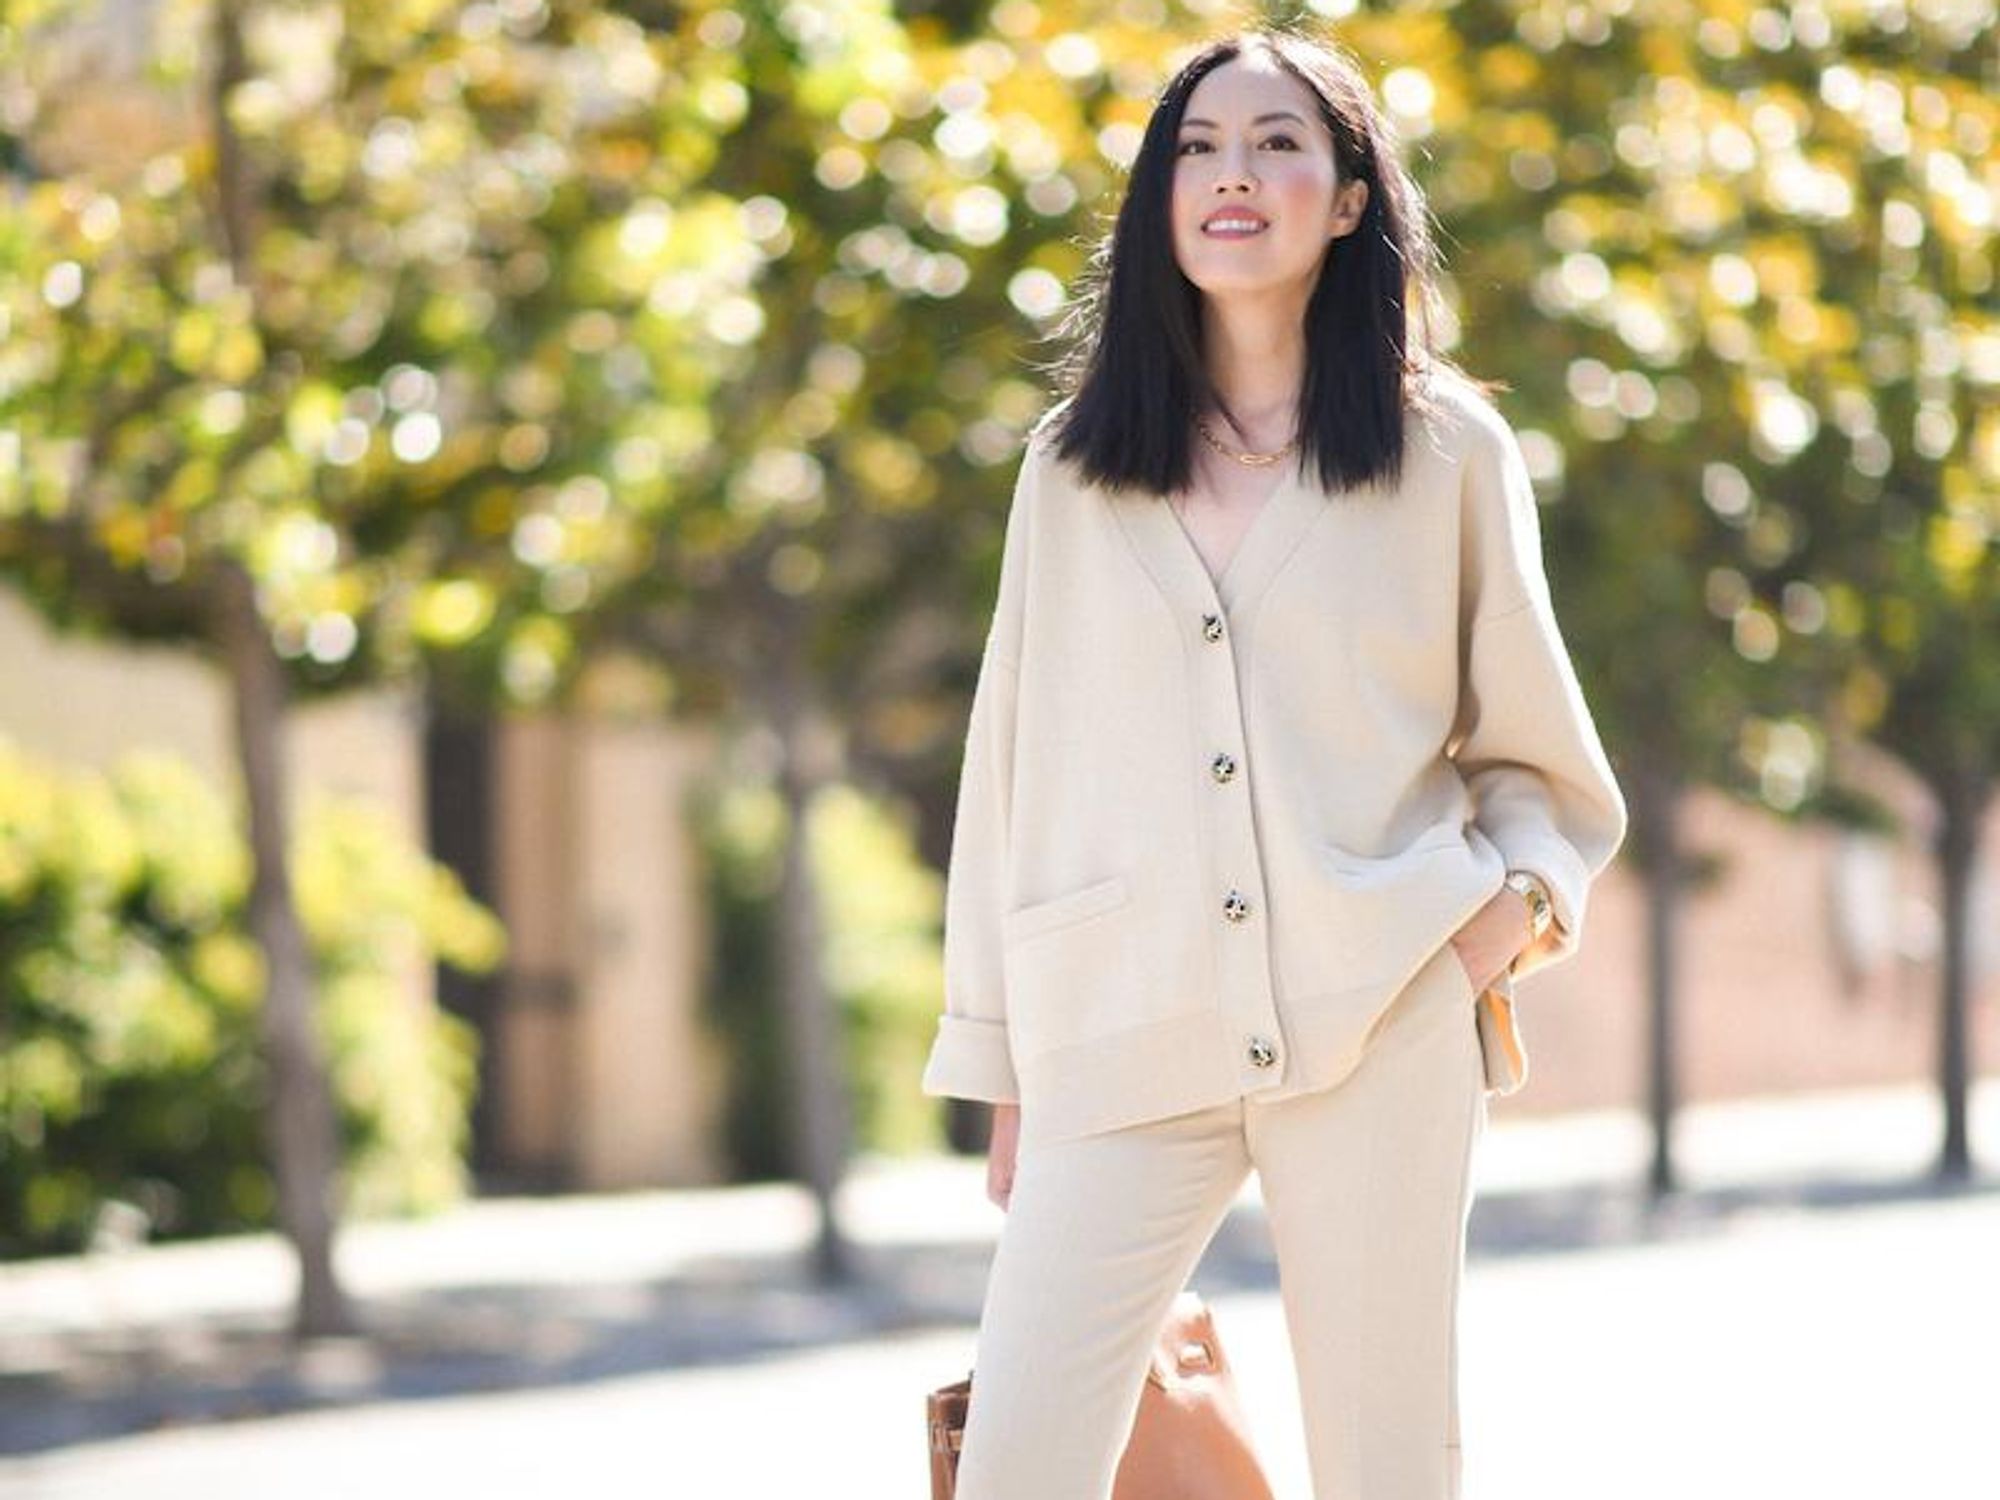 4 Local Tastemakers on Fall Trends + Pandemic Style